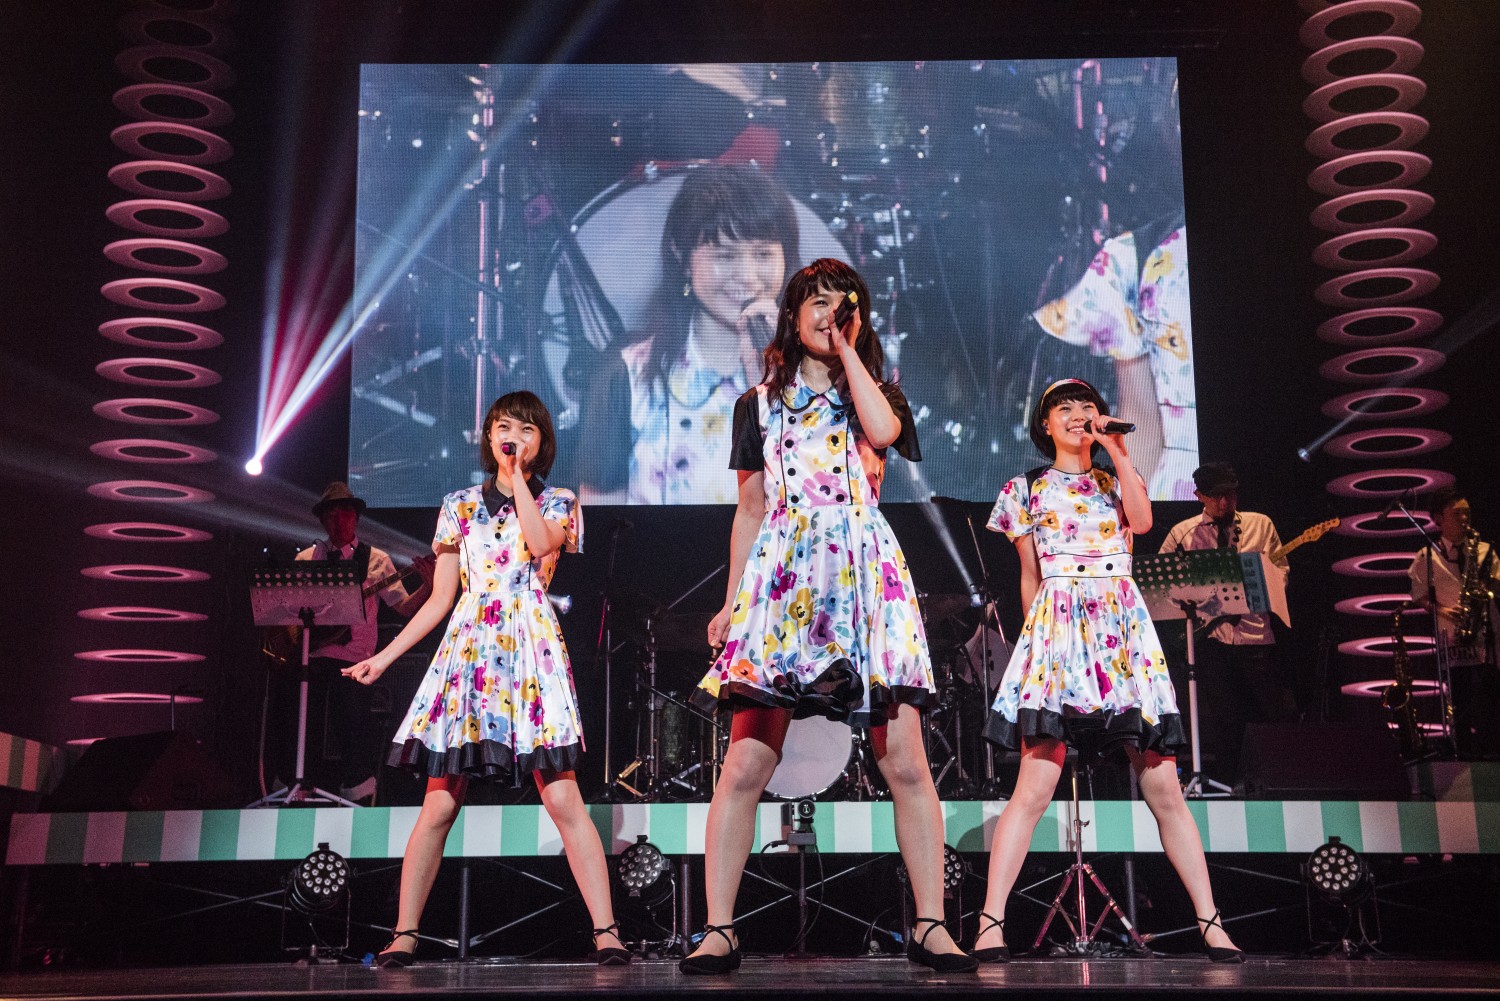 Negicco Give Check to Their Dream Budokan! “The Music Band of Negicco” Live Report!